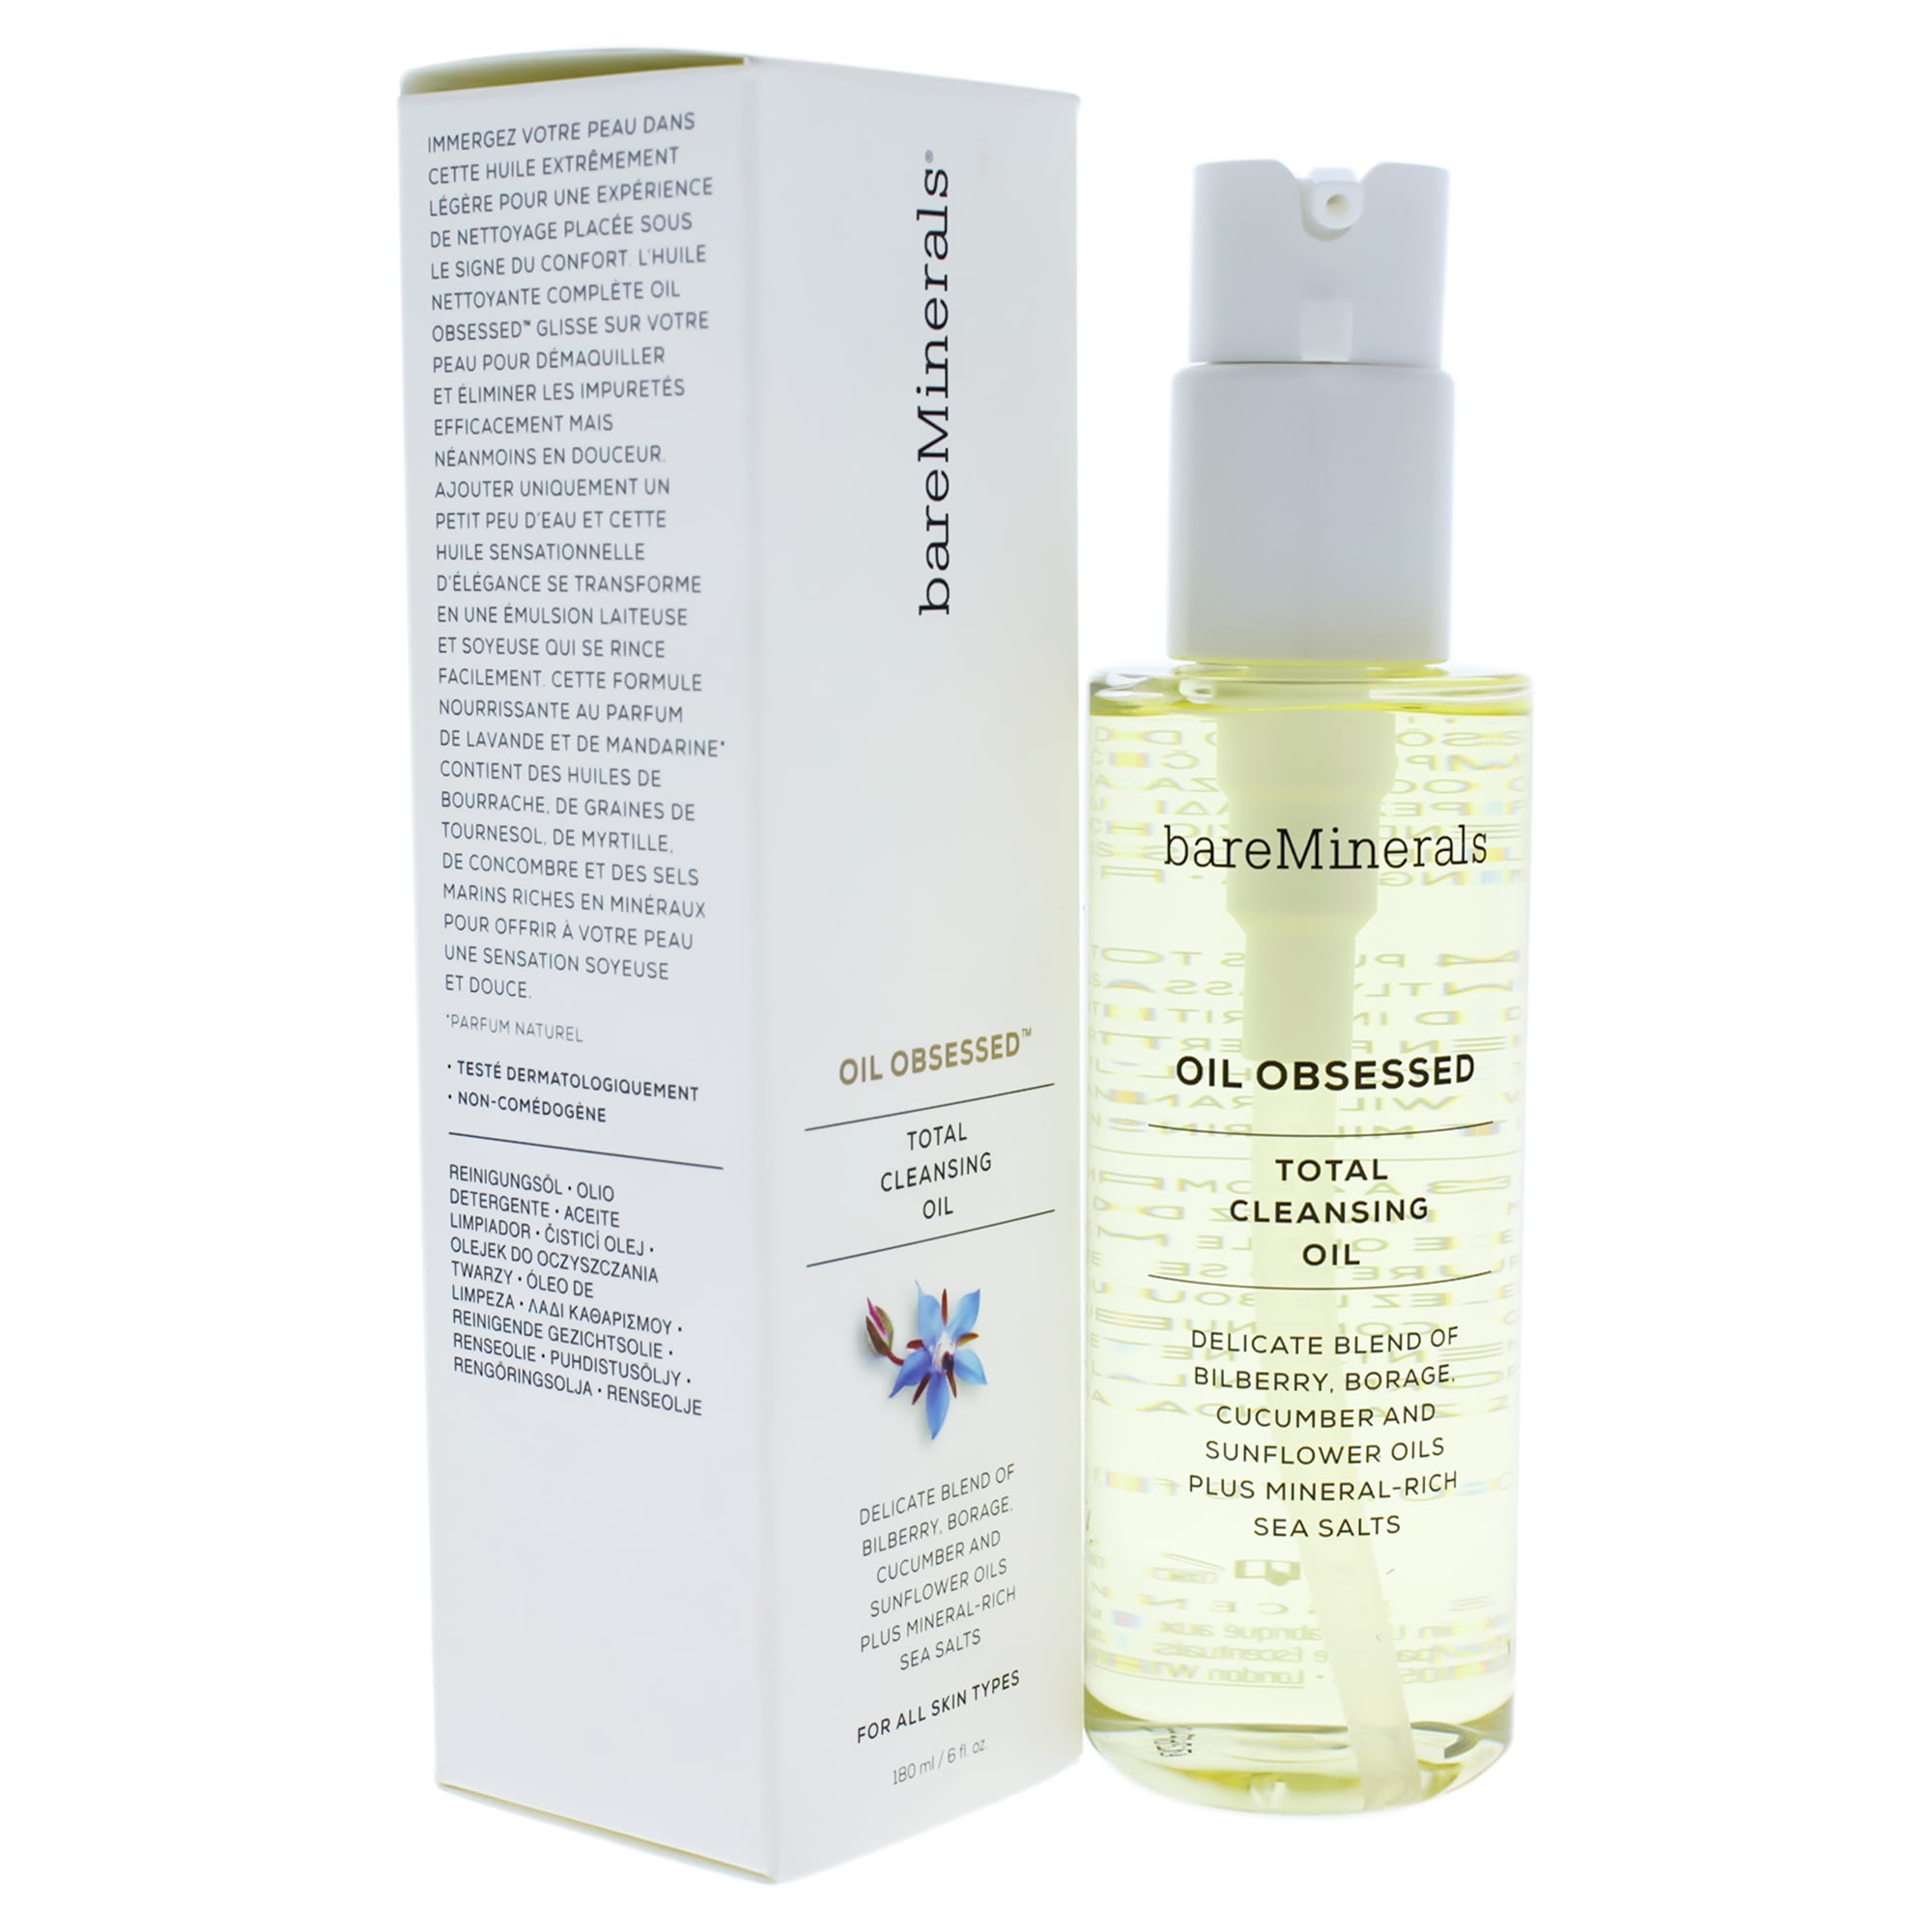 Bareminerals Oil Obsessed Facial Cleansing Oil, 6 Oz - Walmart.com